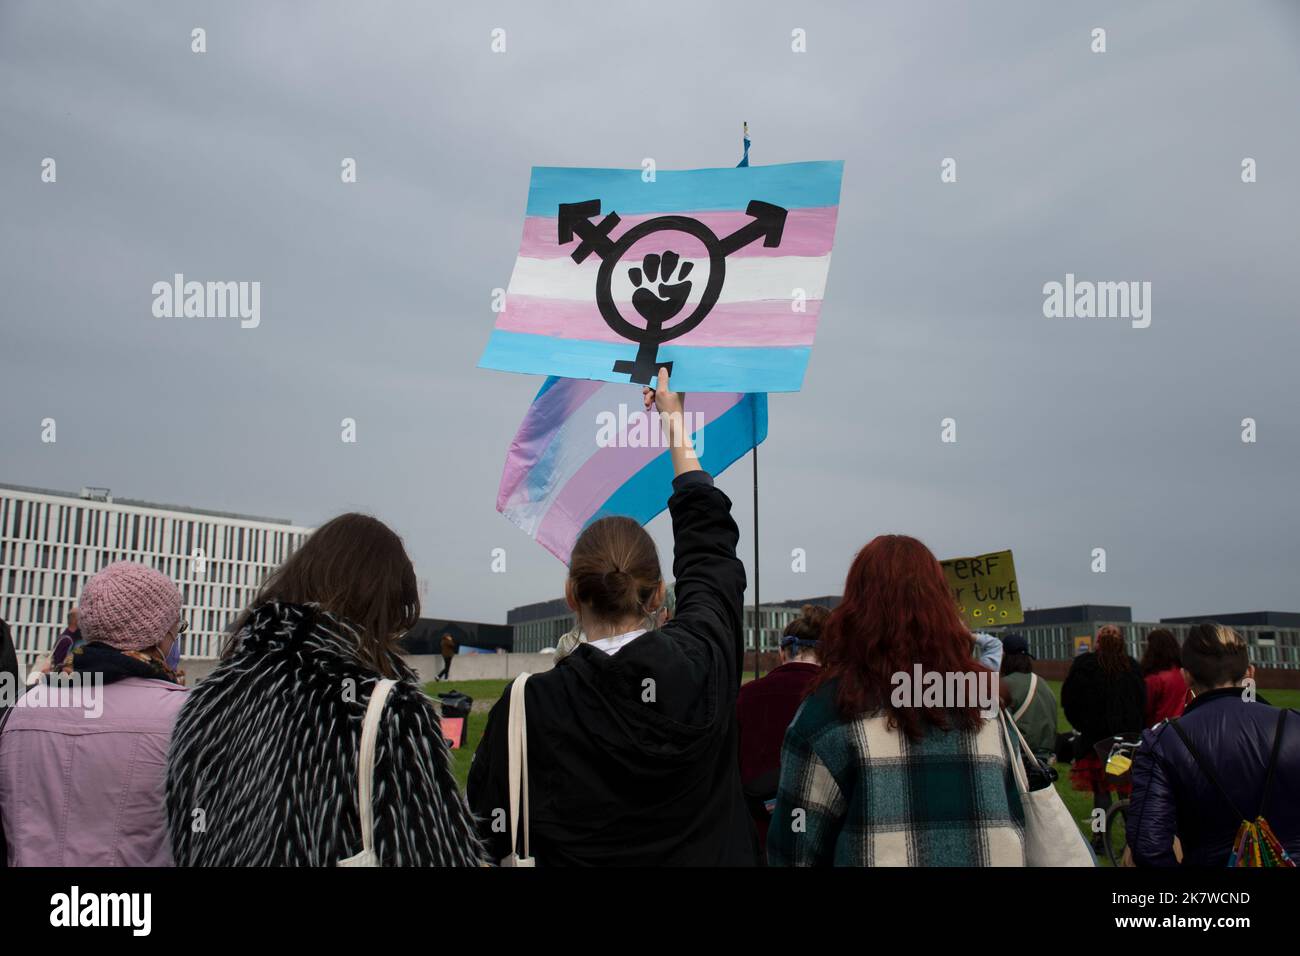 A Transgender rights protester holds up a sign at a demonstration against Terfs in Berlin, Germany Stock Photo